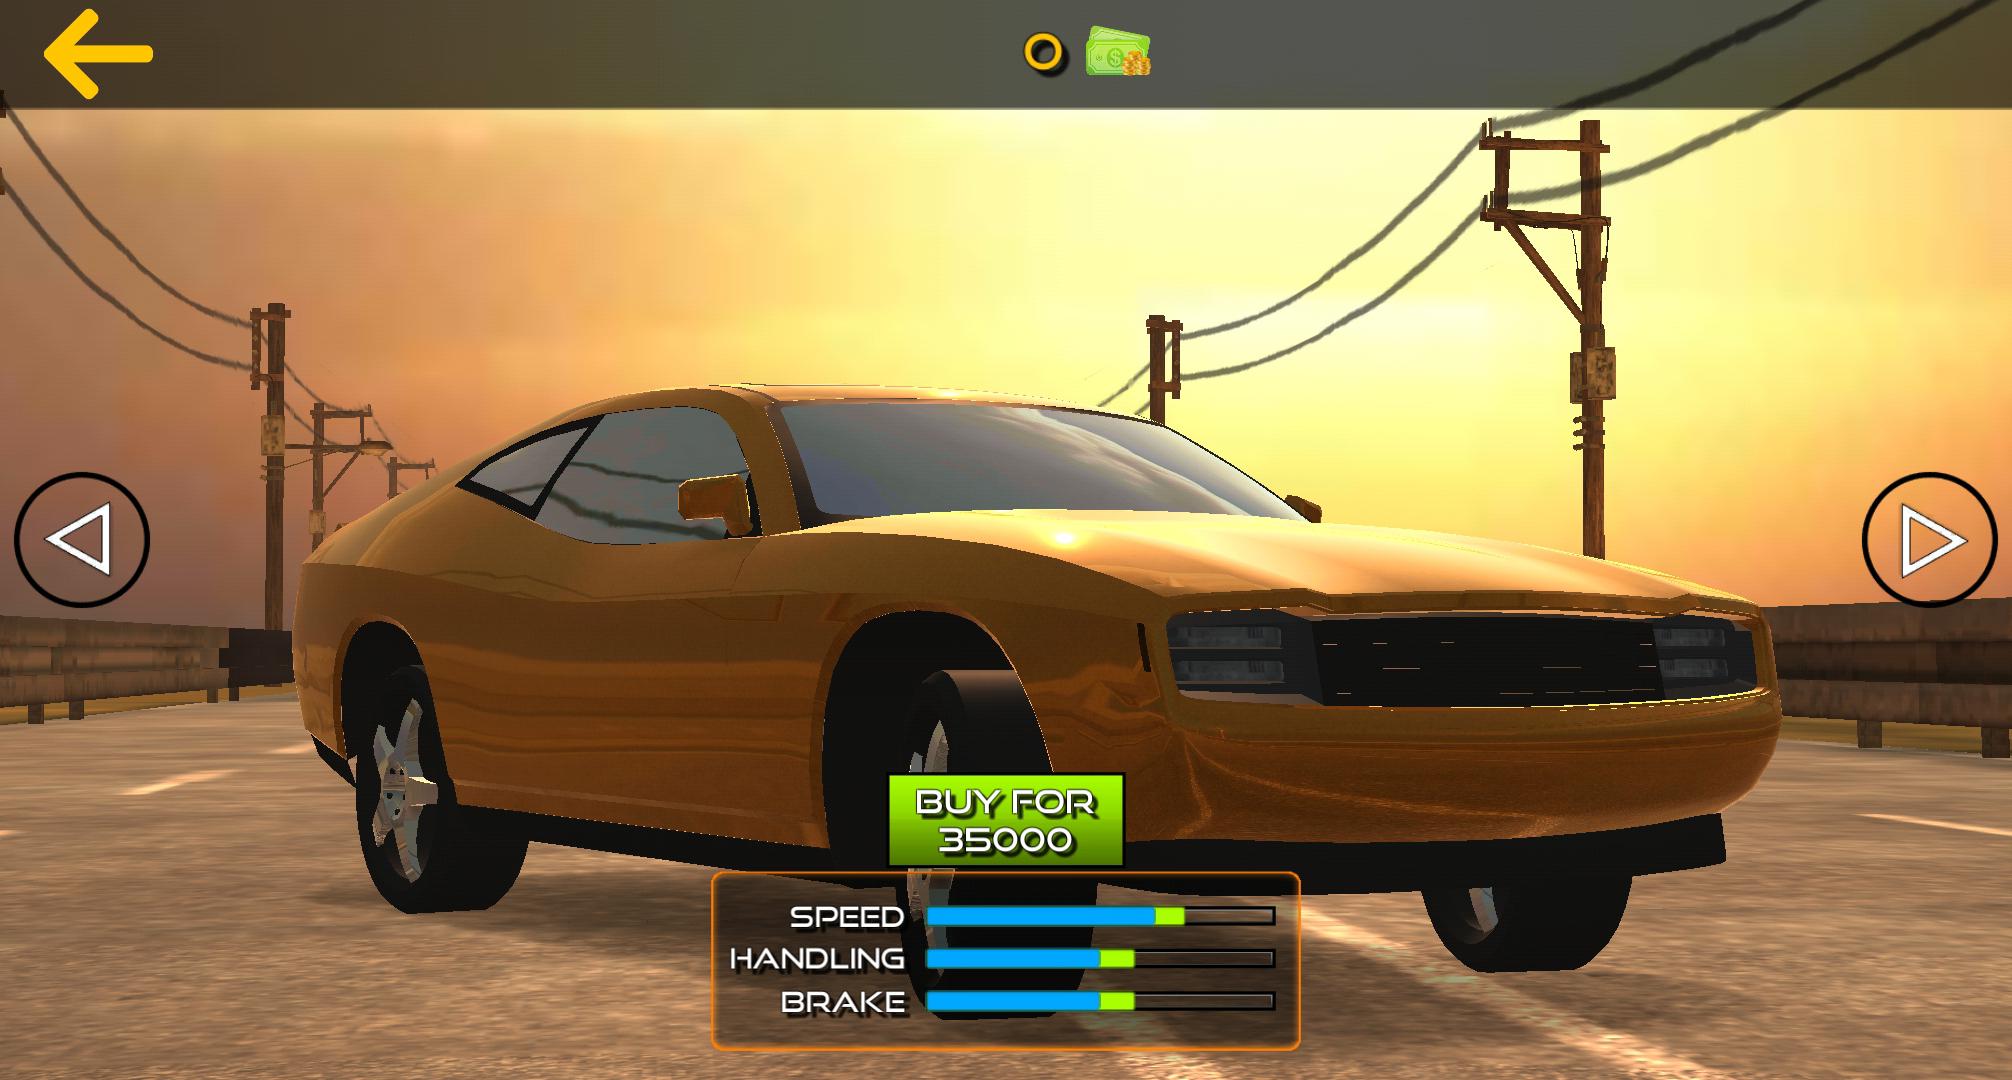 Traffic Gamepad for Android - APK Download